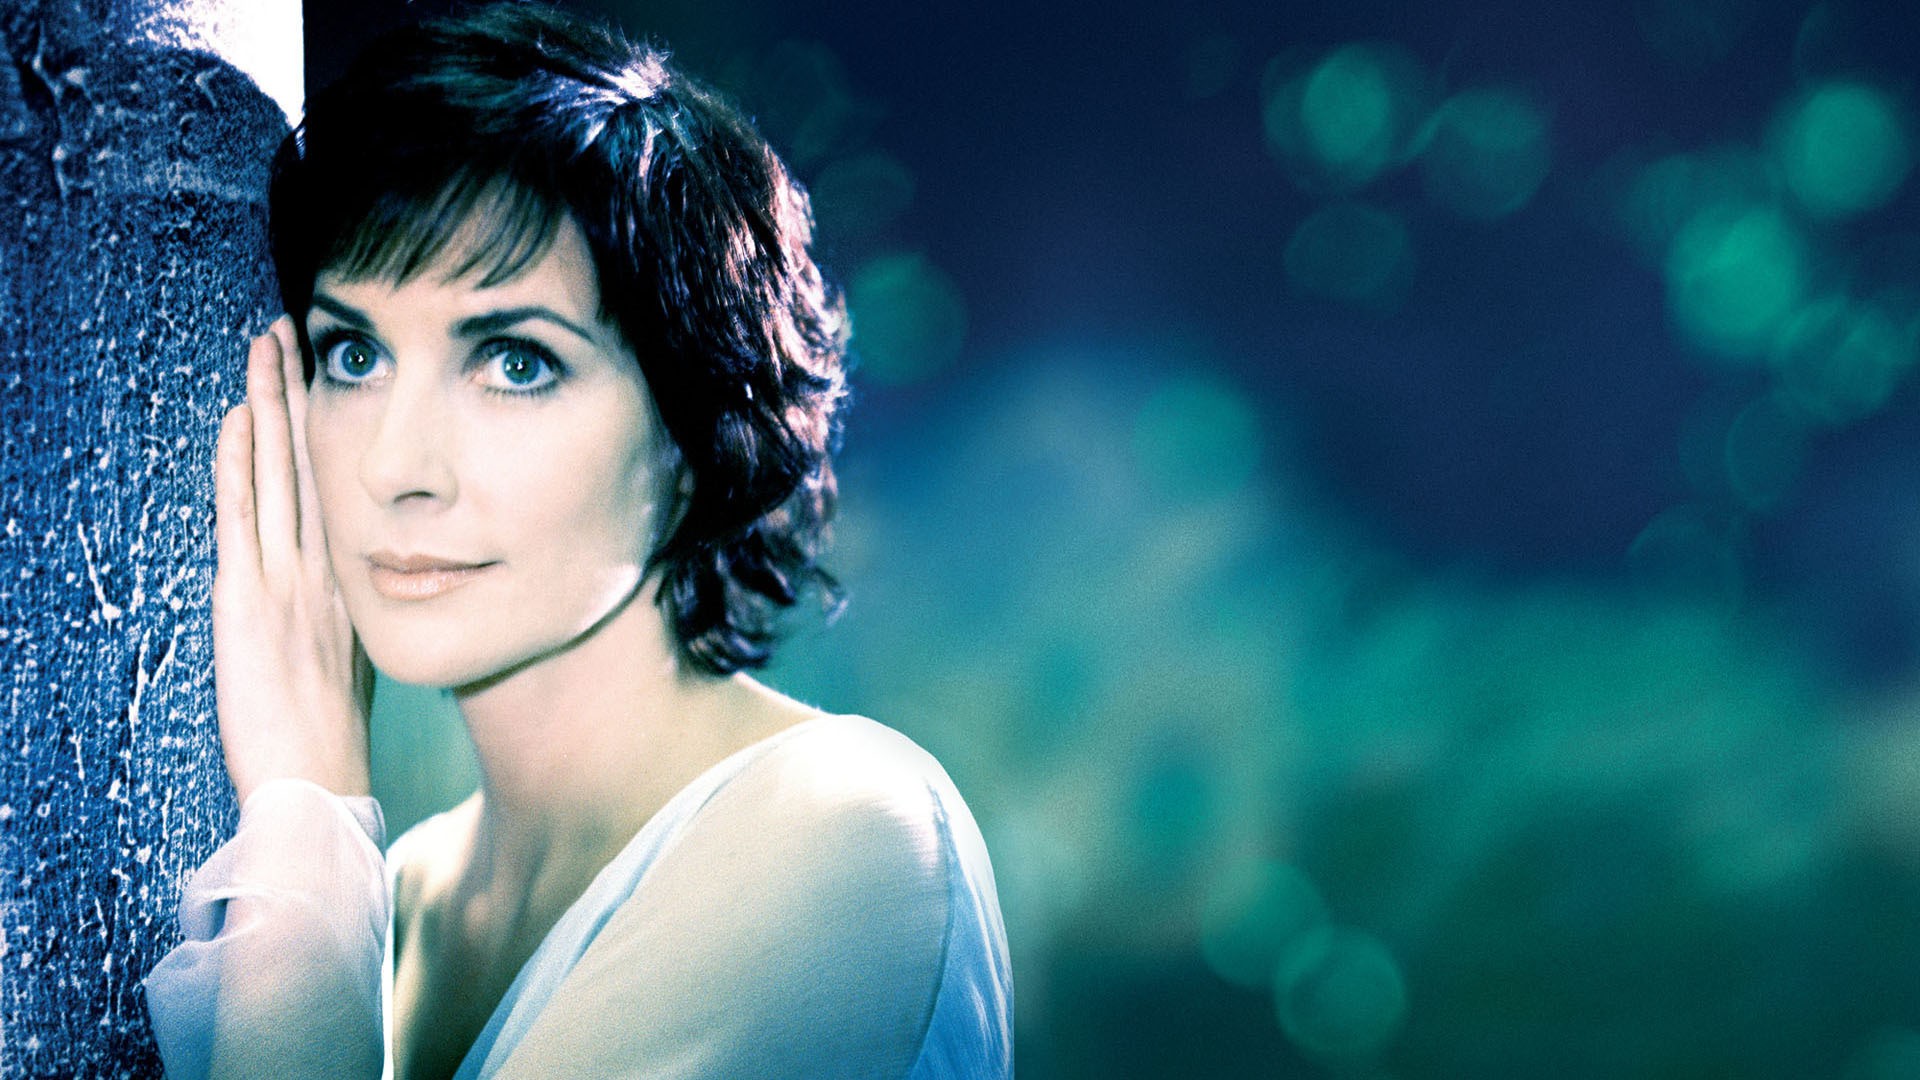 How Exactly Did Enya Become One of the Richest Musicians in the World?